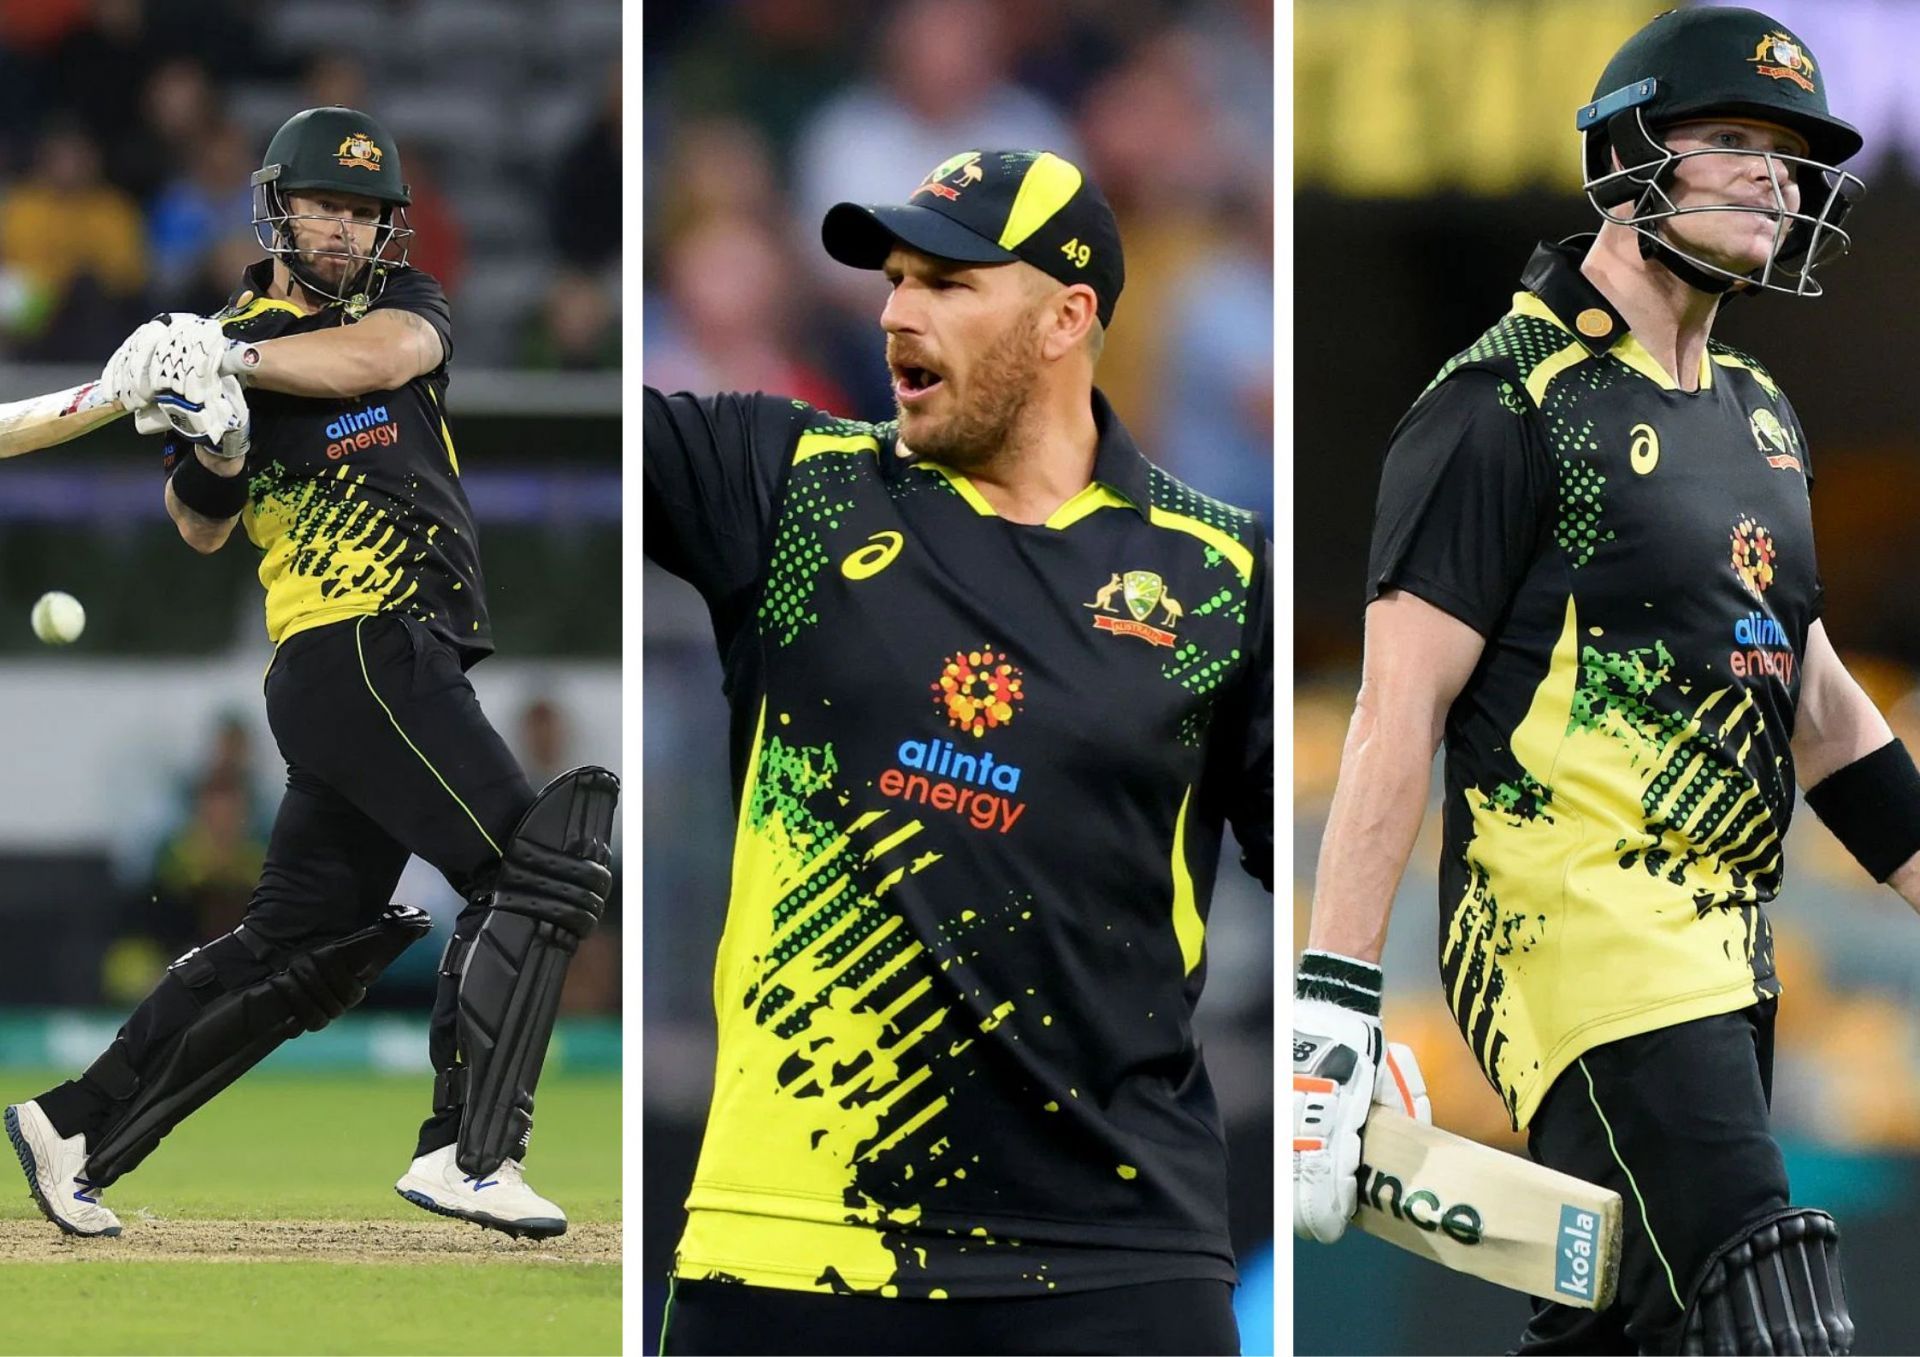 Defending champions Australia could see a few of their players appear in the T20 World Cup one final time.